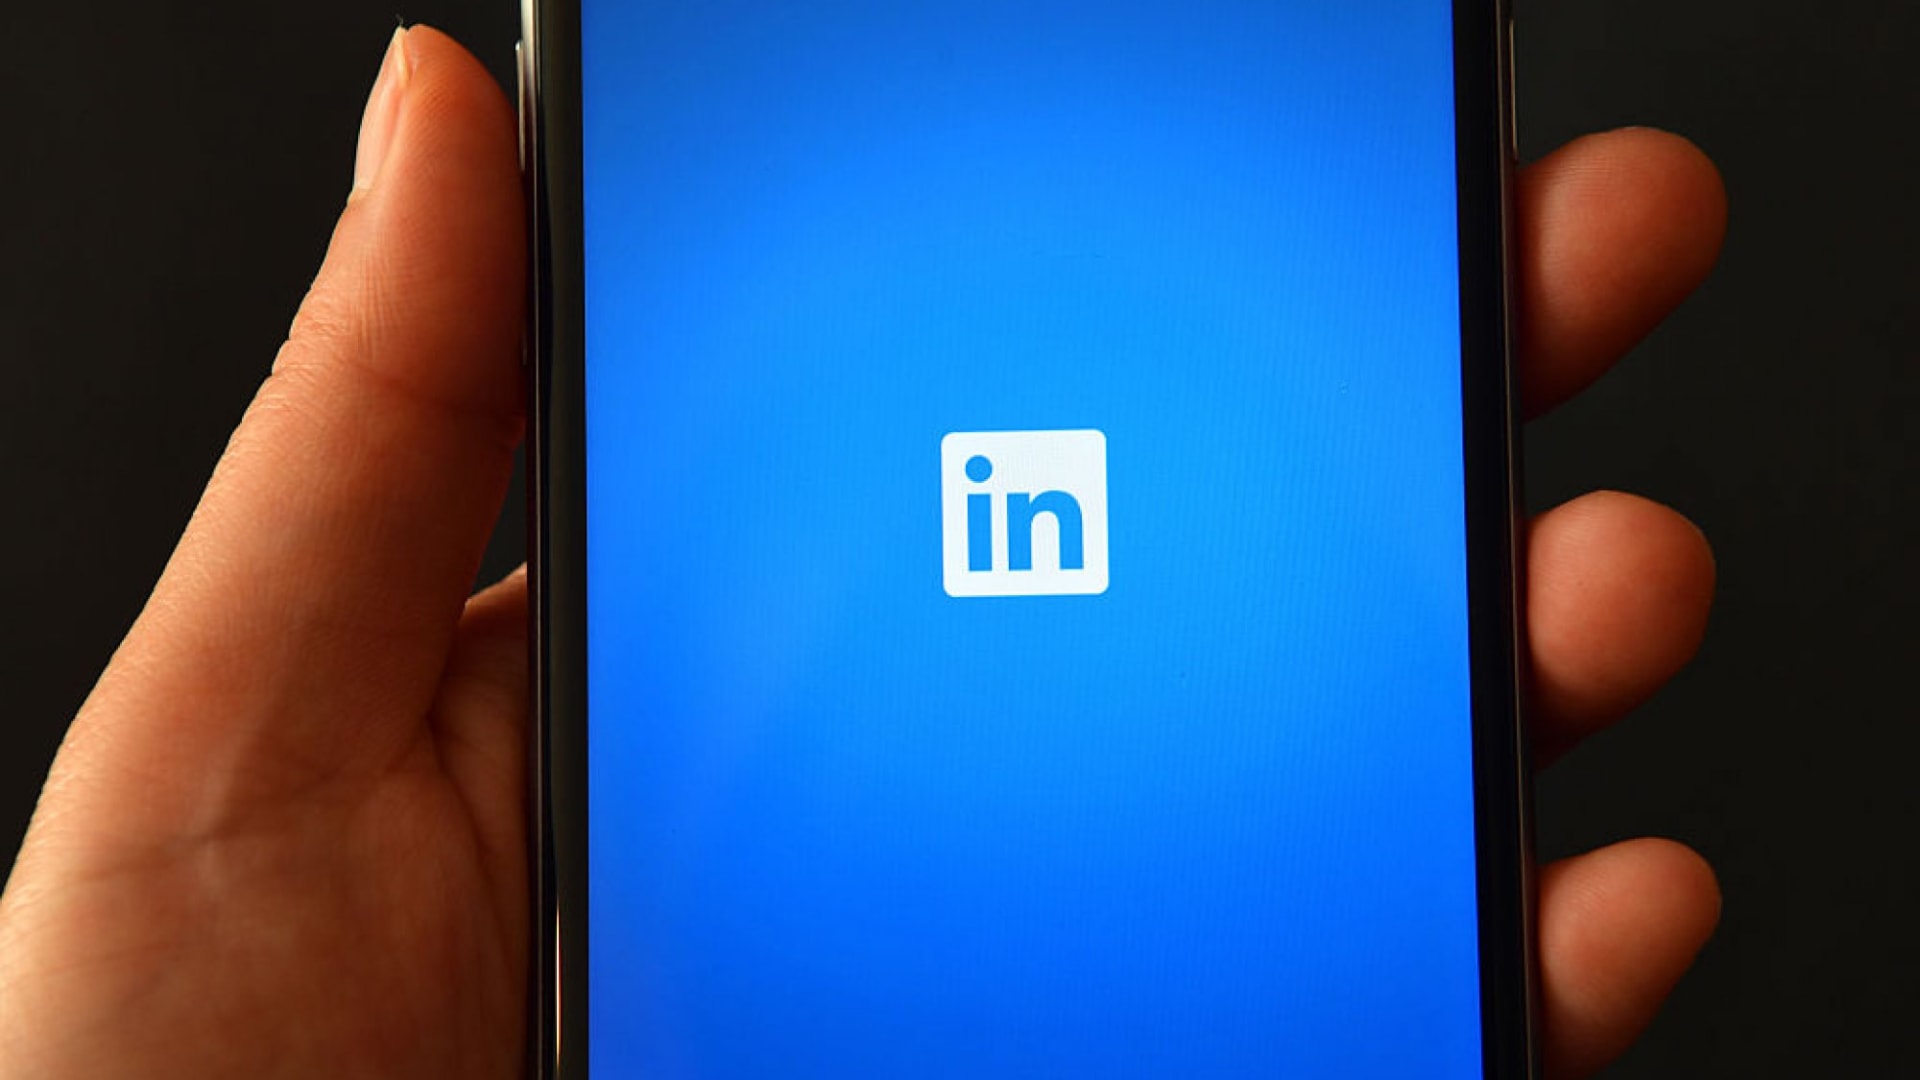 This Common LinkedIn Mistake Could Be Fatal to Your Brand. Do This Instead